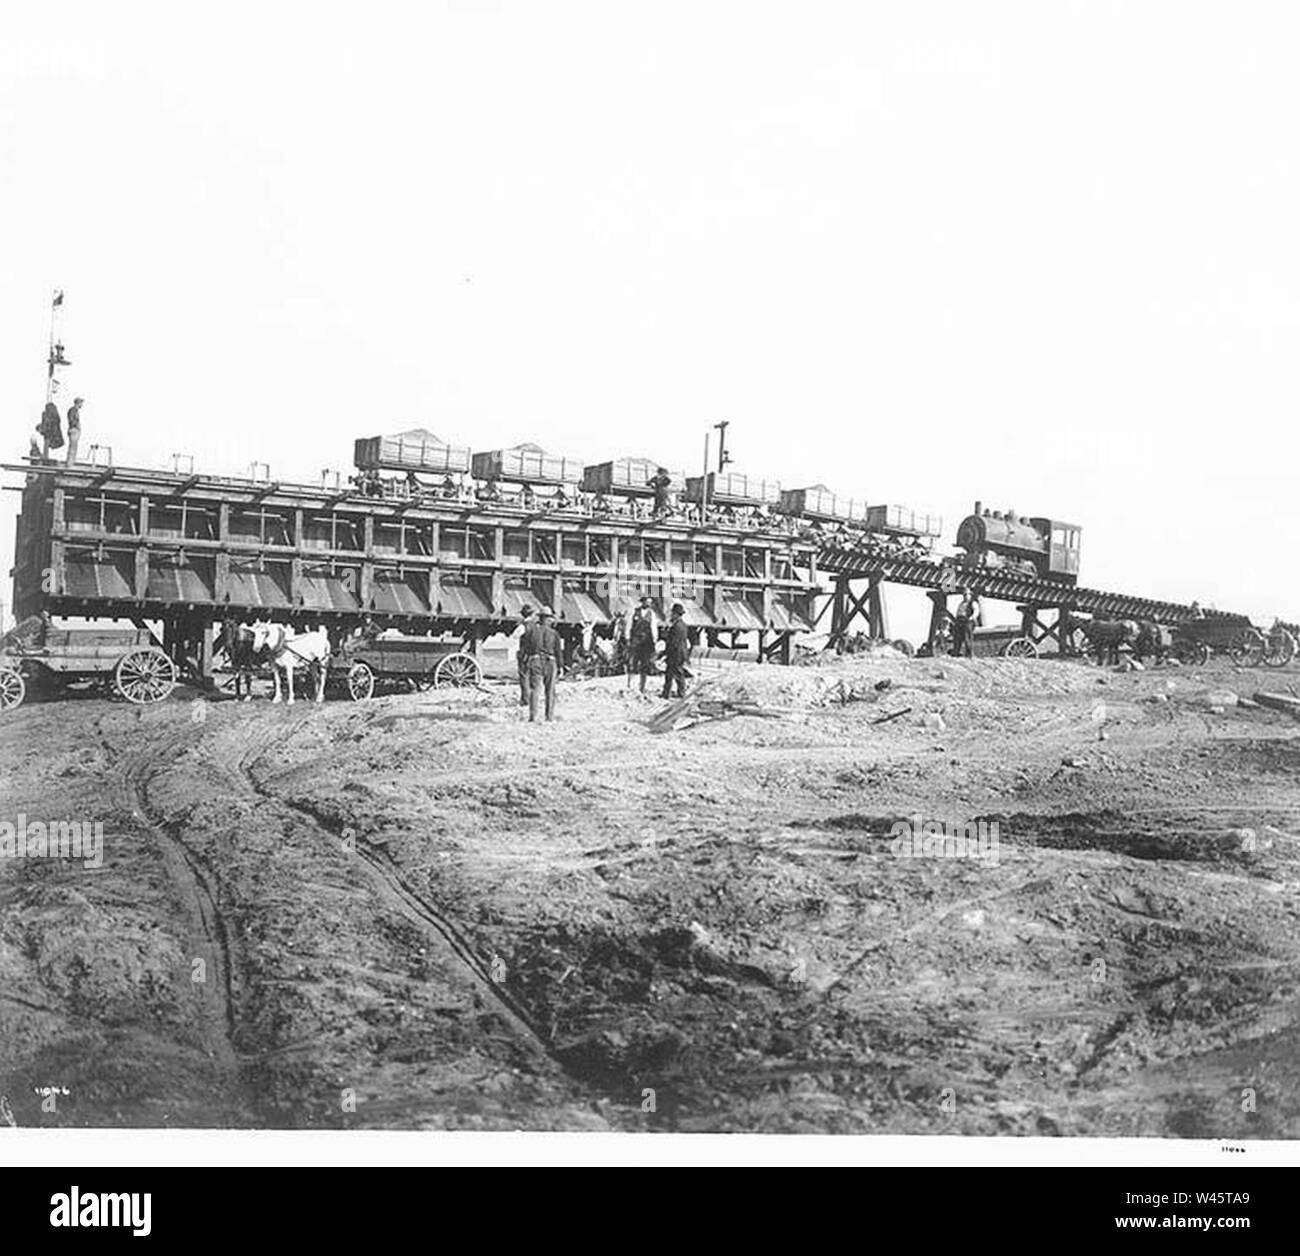 Construction train at work on excavation for water reservoir, Beacon Hill, Seattle (CURTIS 780). Stock Photo